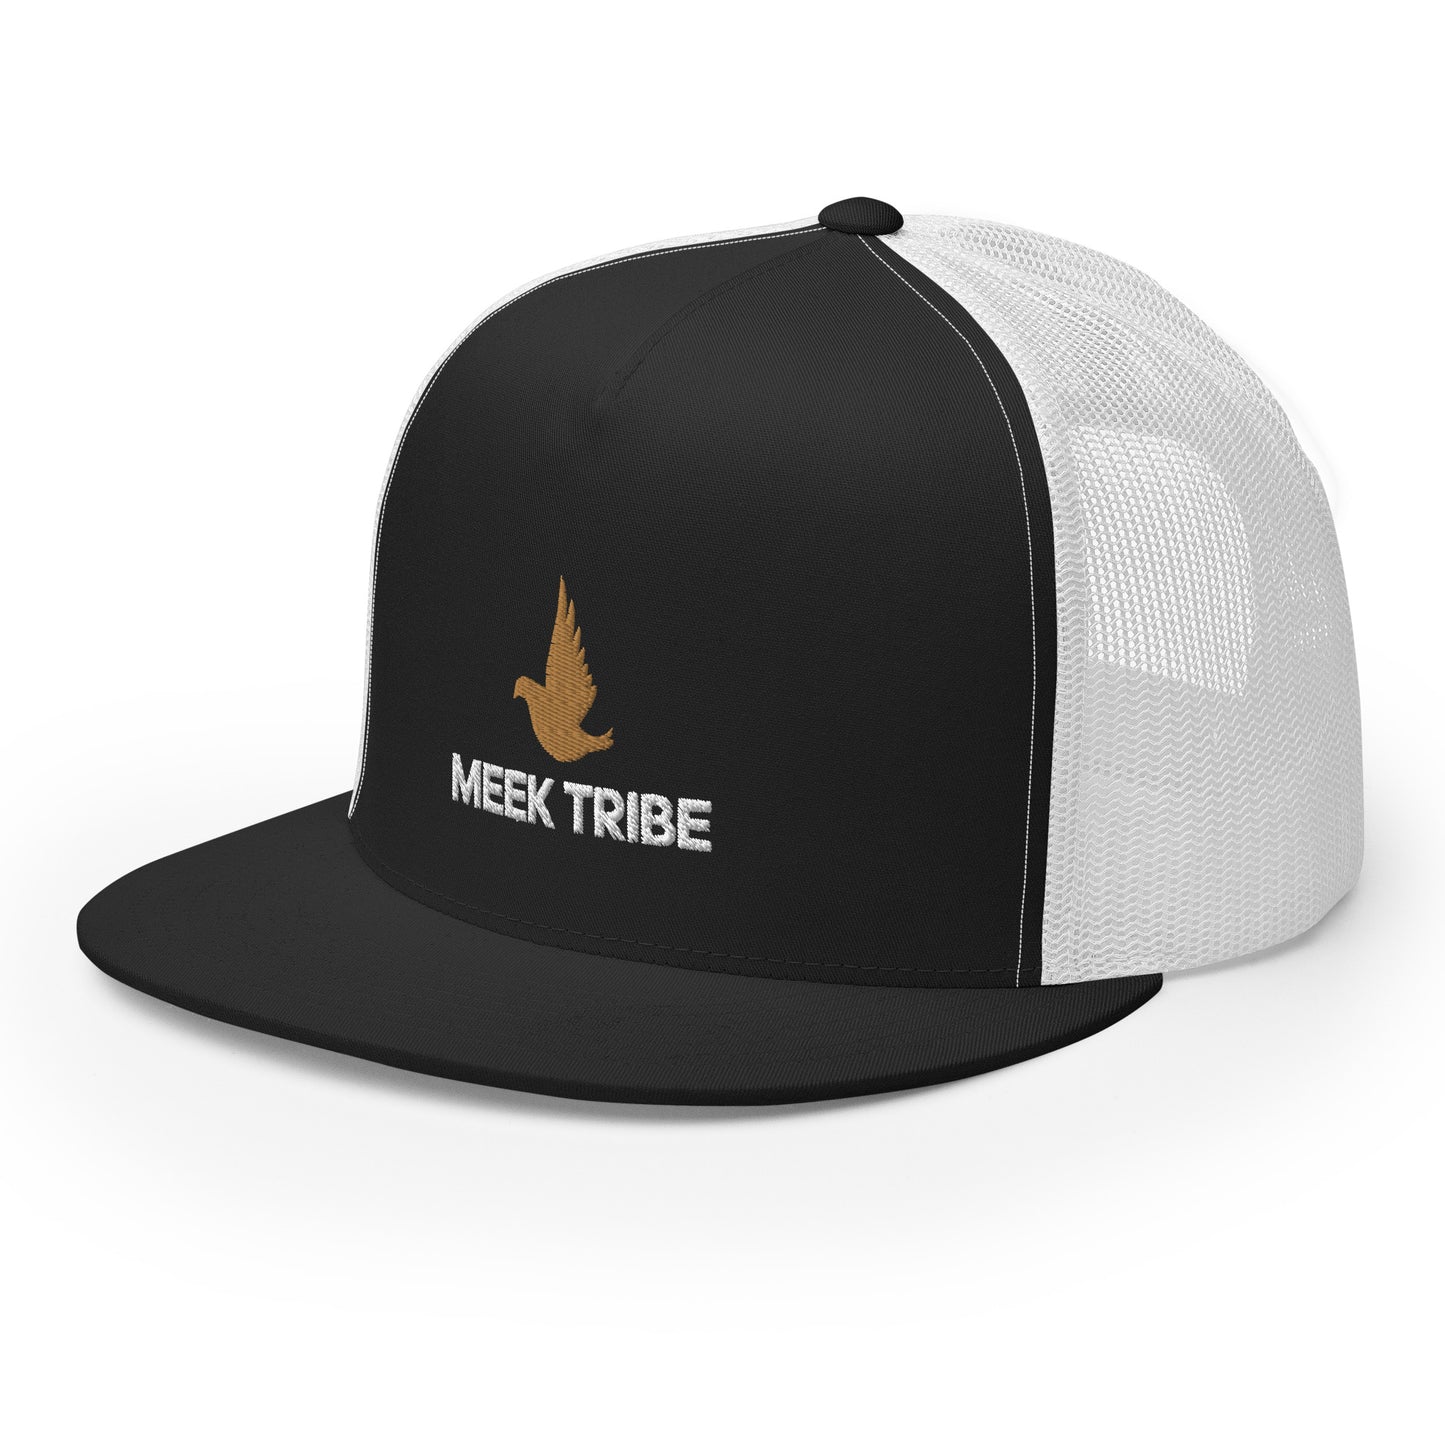 Meek Tribe "Touch of Gold" Trucker Snap Back